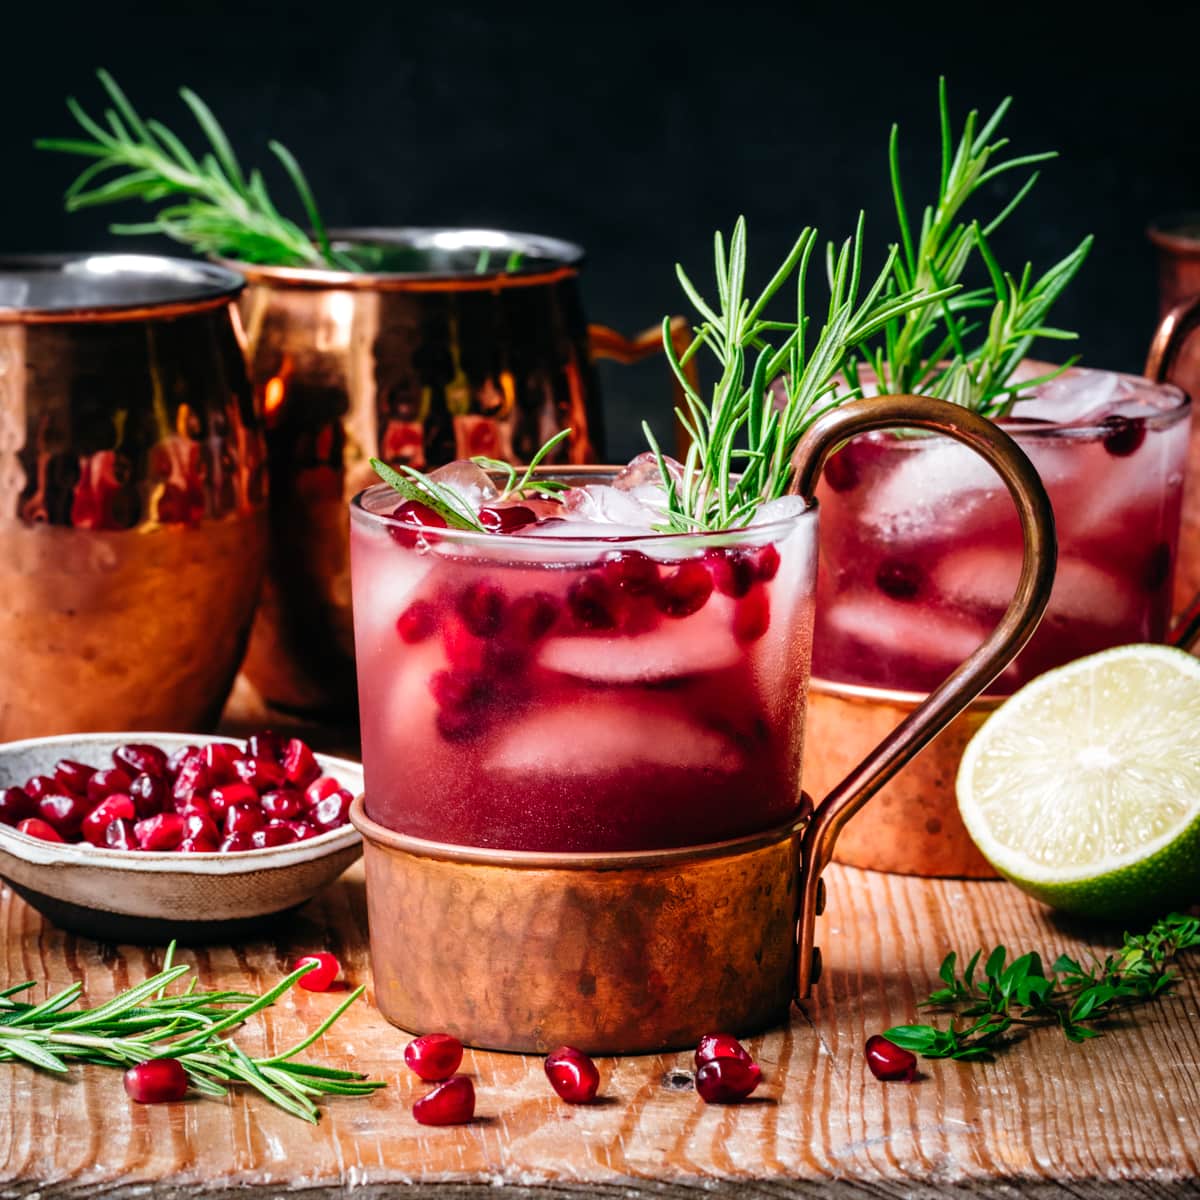 https://www.crowdedkitchen.com/wp-content/uploads/2021/09/pomegranate-moscow-mule-11.jpg